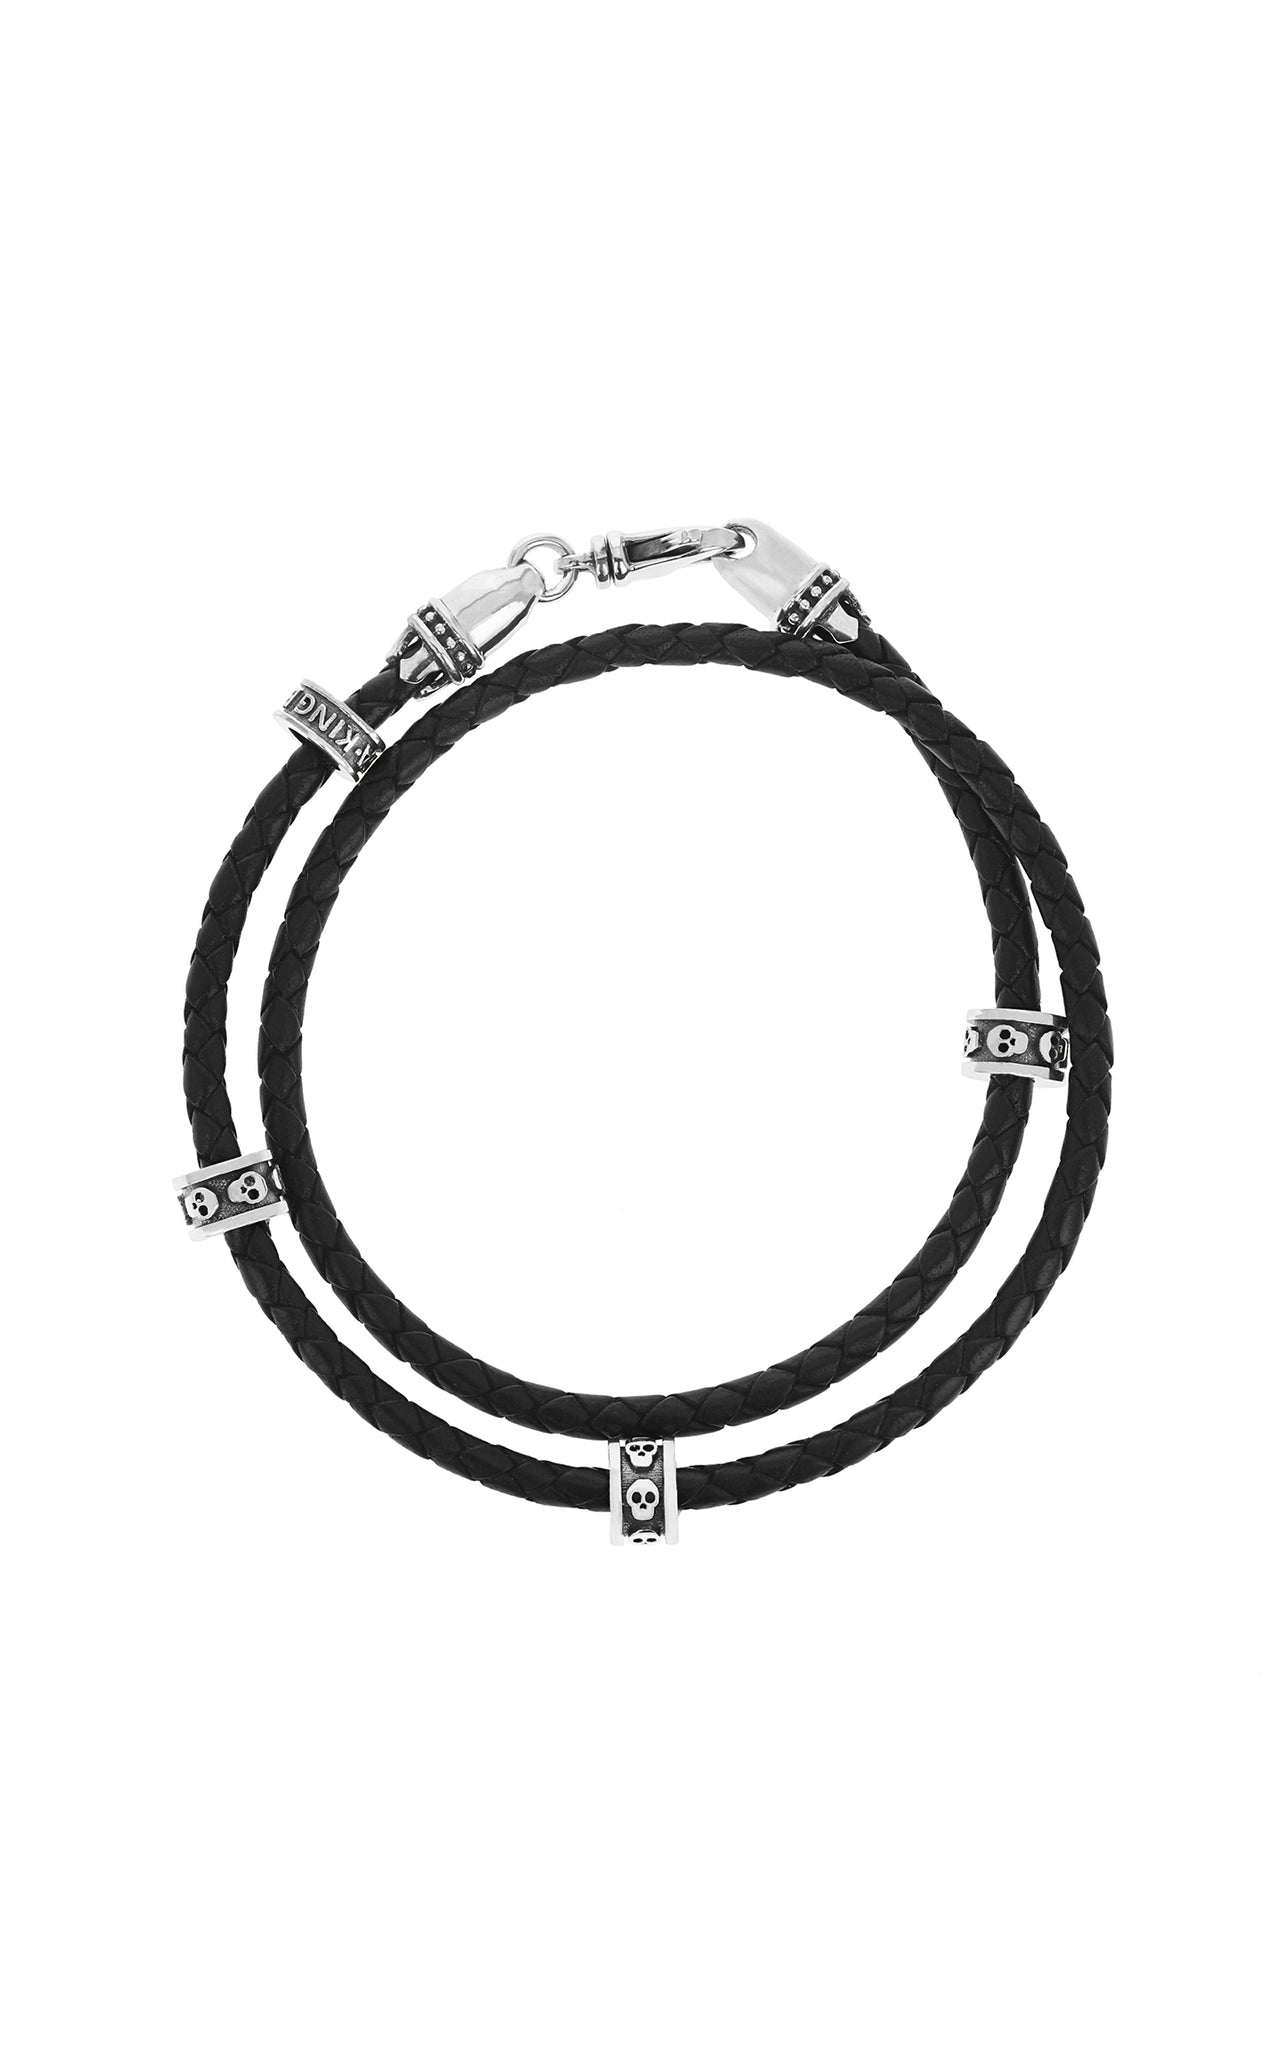 Double Wrap Leather Bracelet w/ Micro Stackable Skull Rings